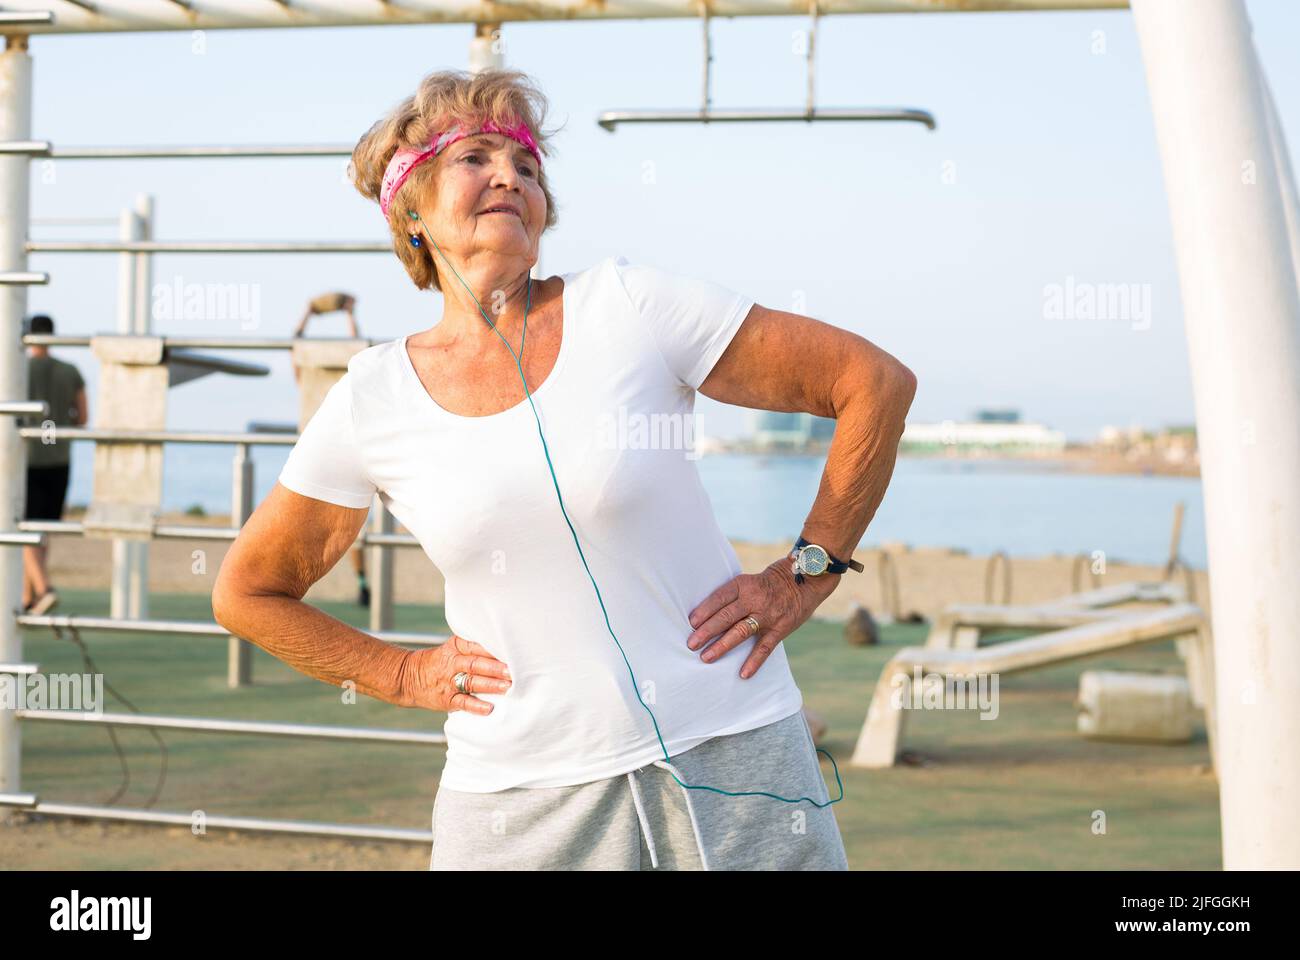 An elderly lady trains outdoors on the playground Stock Photo